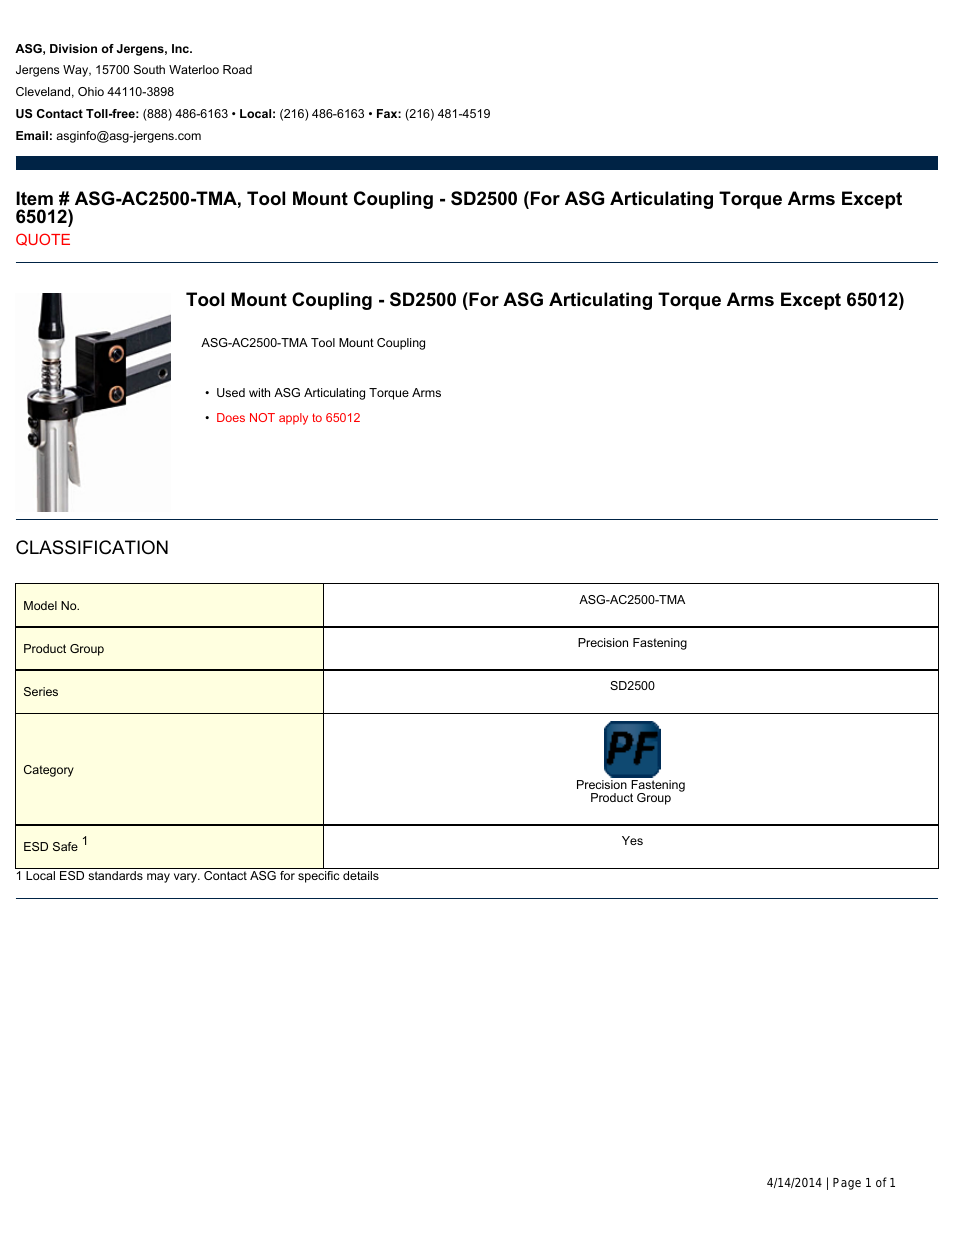 ASG-AC2500-TMA Tool Mount Coupling - SD2500